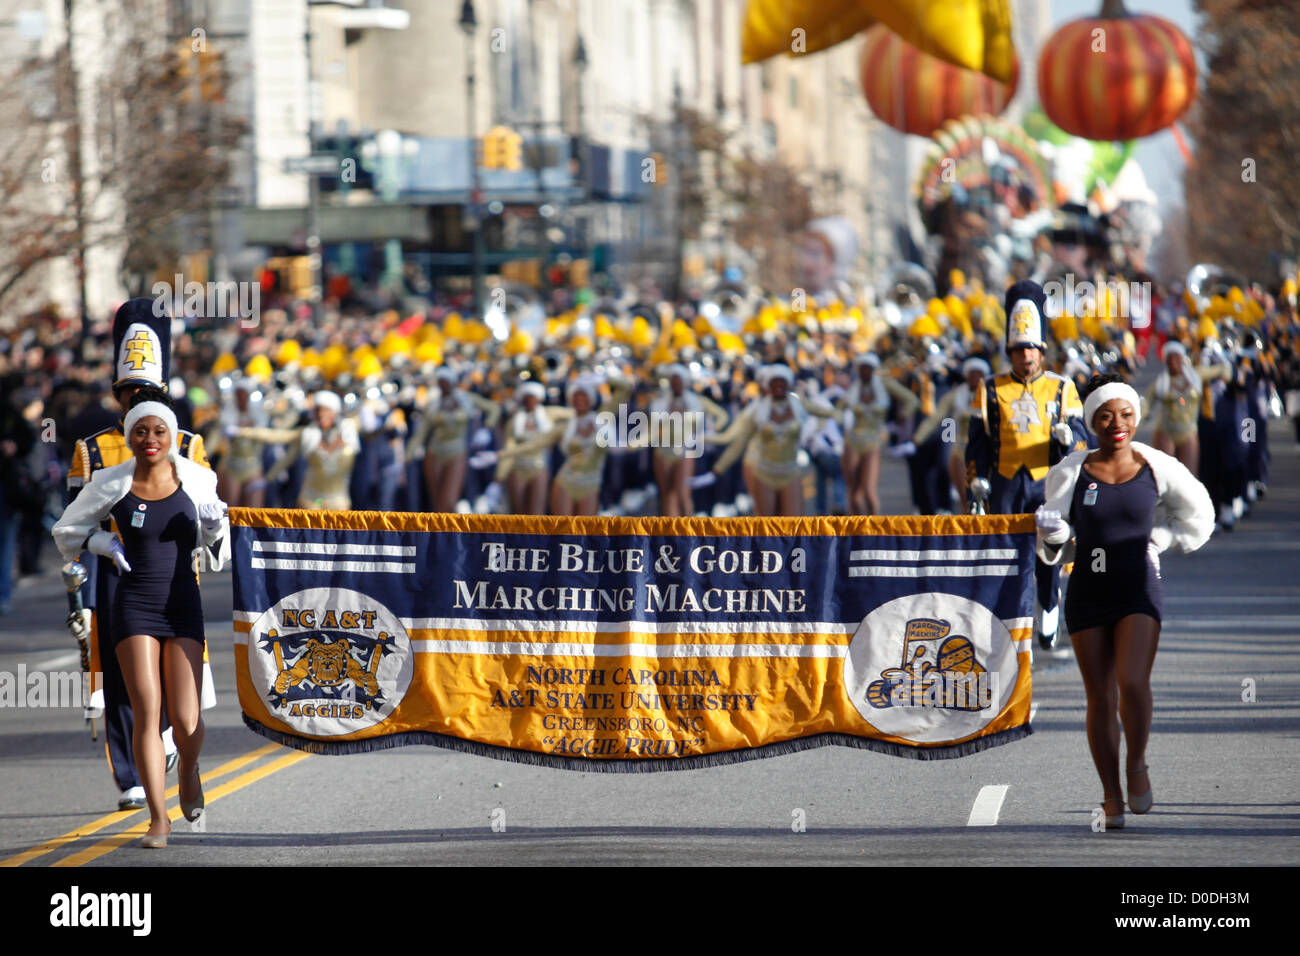 North Carolina A&T State University Marching Band in Macy's Thanksgiving Day Parade in New York City, on Thursday, Nov. 22, 2012. Stock Photo